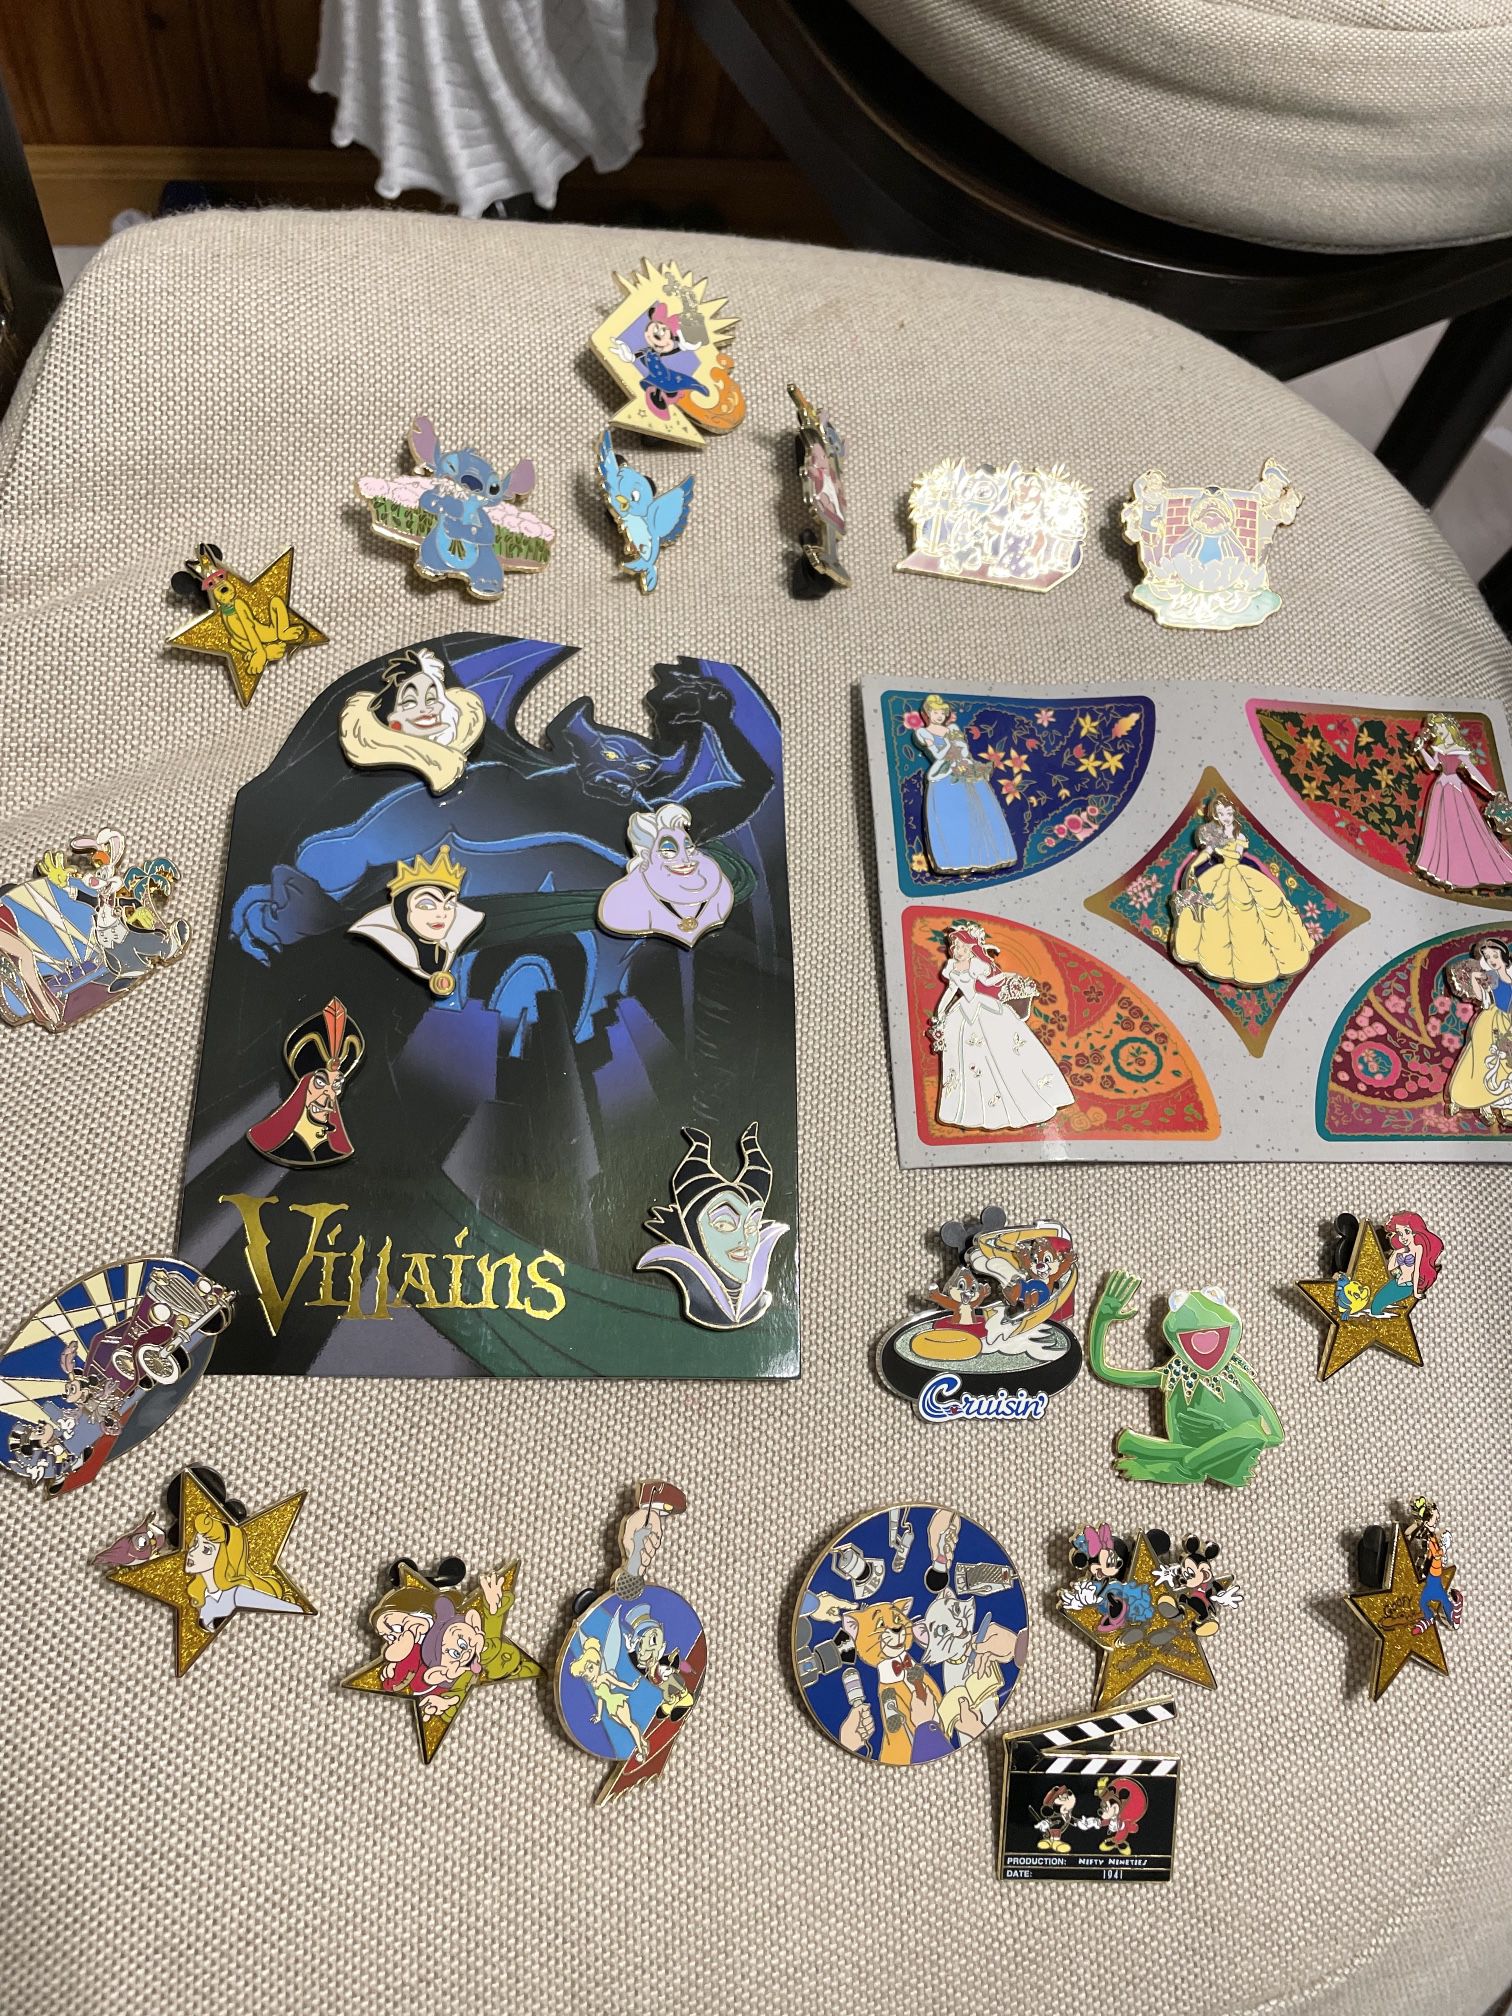 Limited edition Disney Pins / lanyards/ Other Collectibles